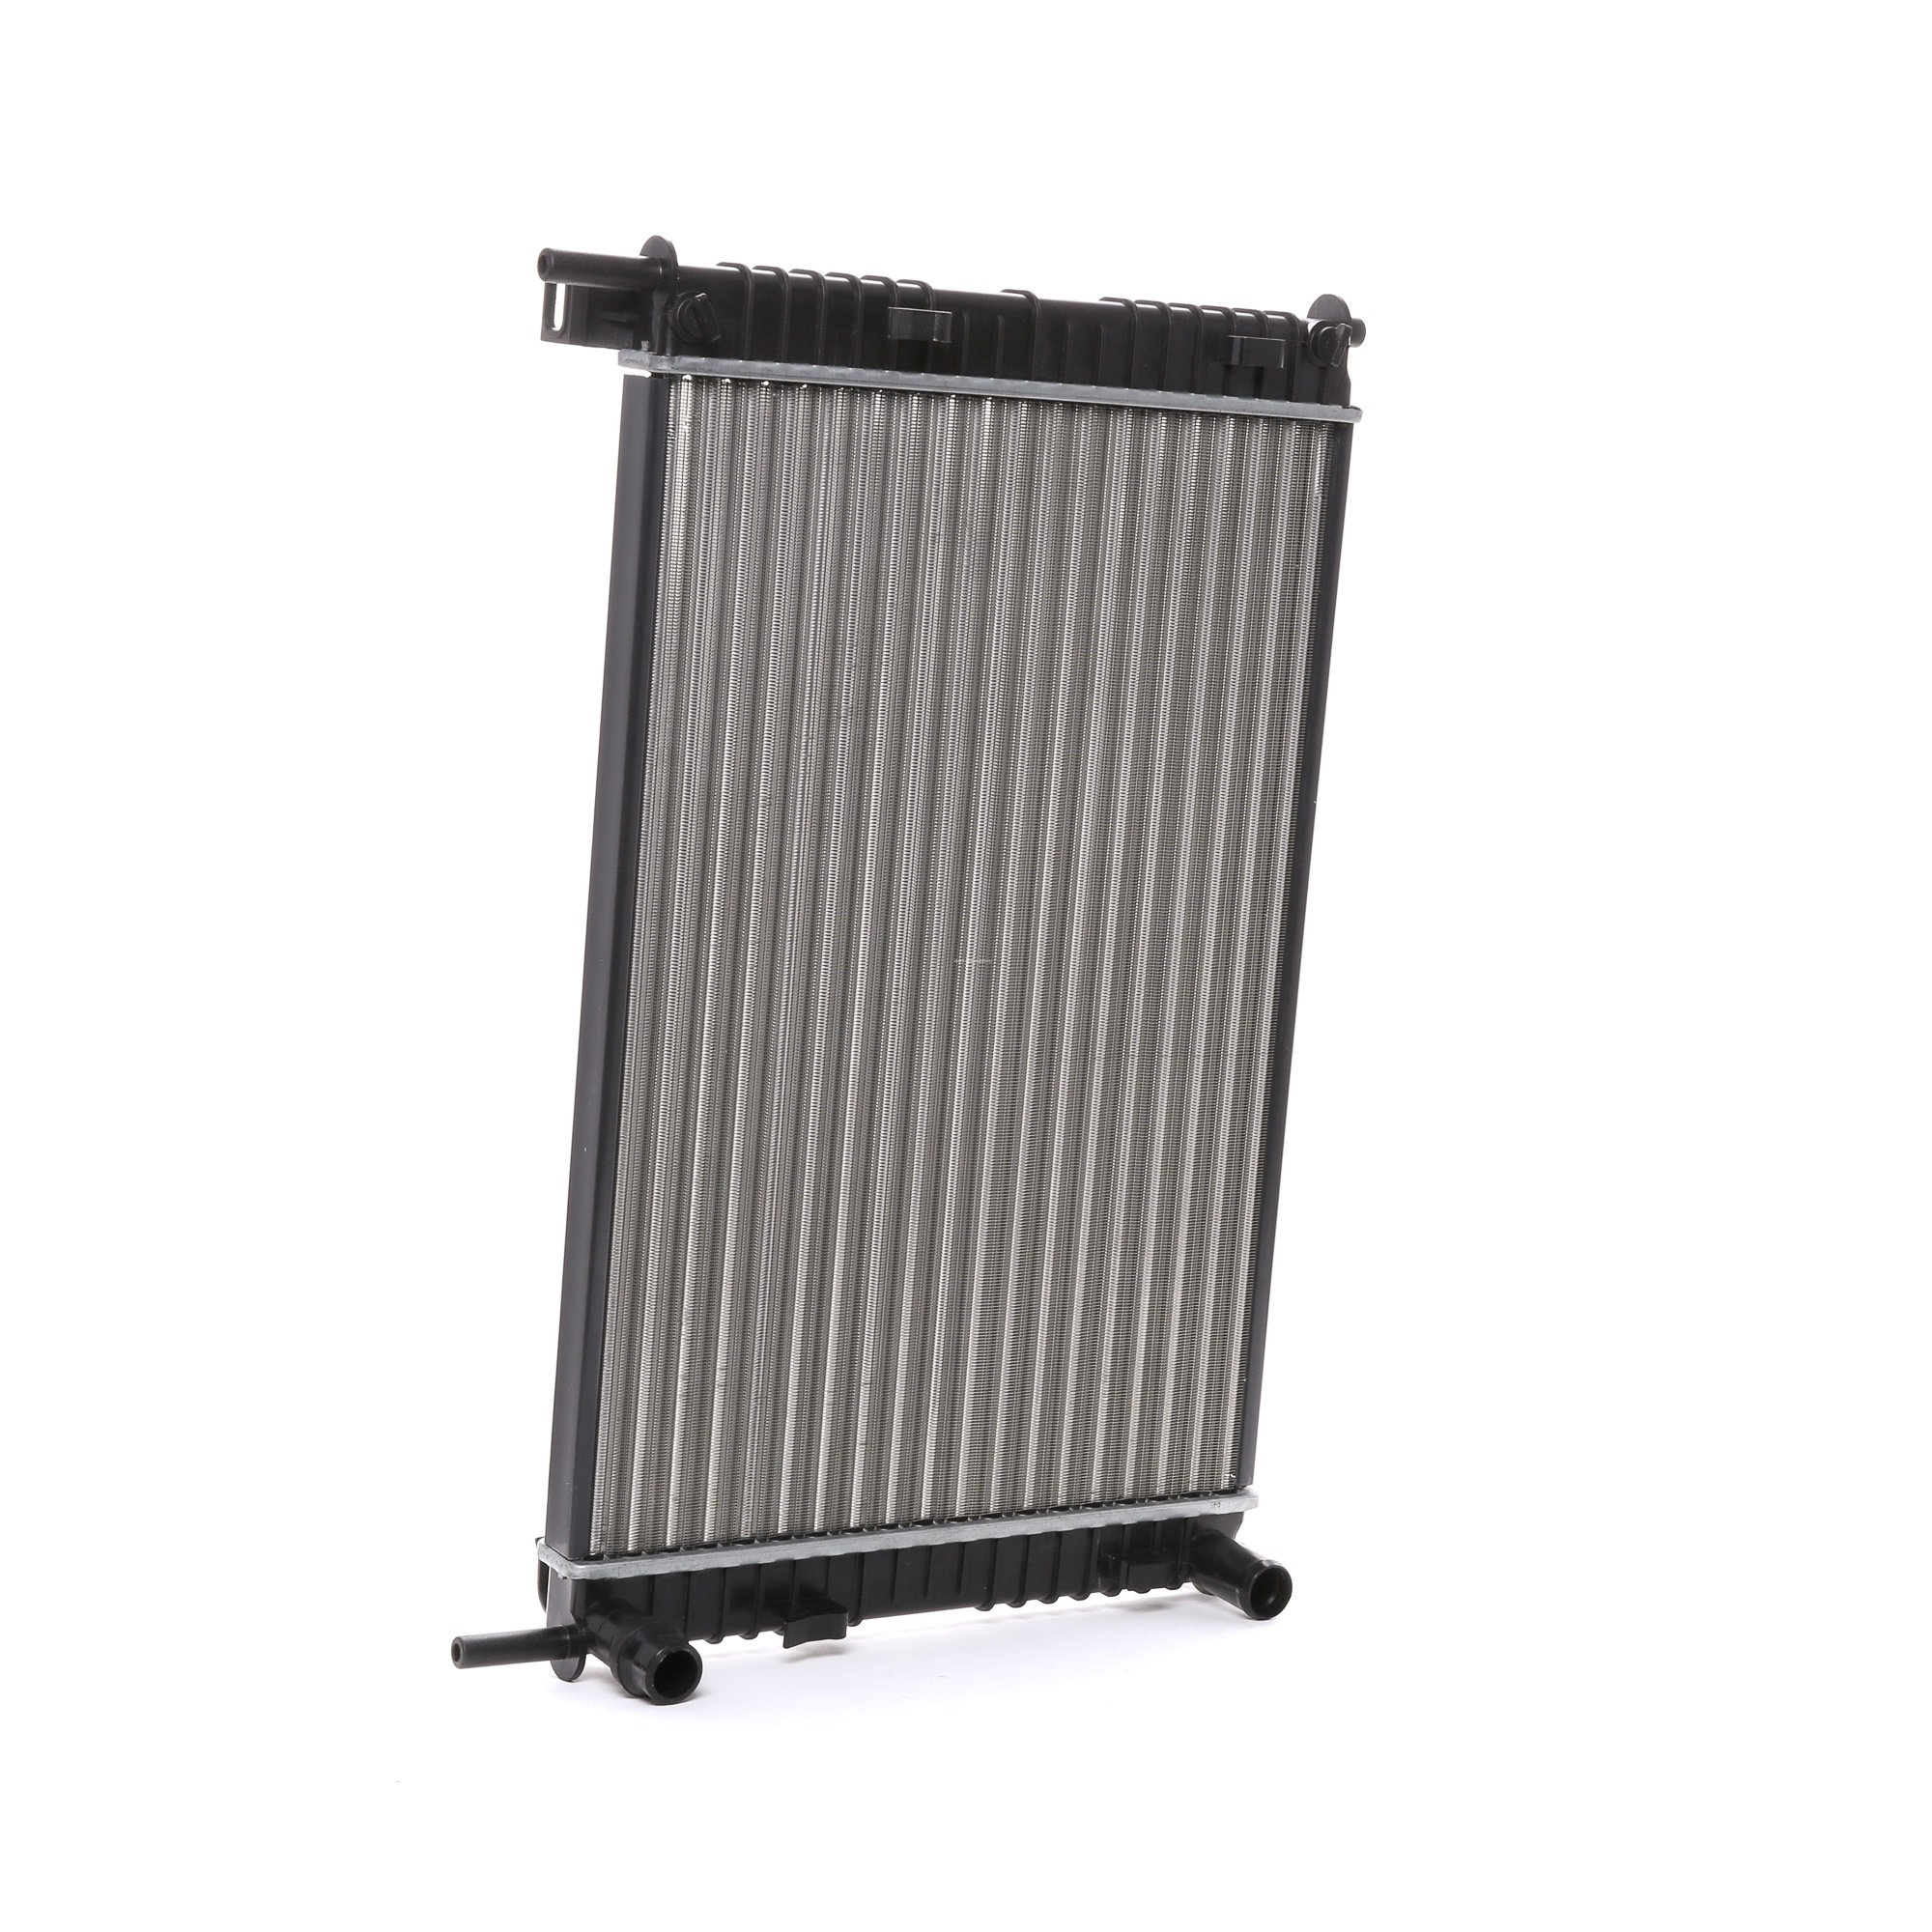 STARK Aluminium, Plastic, for vehicles with/without air conditioning, 348 x 500 x 23 mm, Manual Transmission Radiator SKRD-0120217 buy